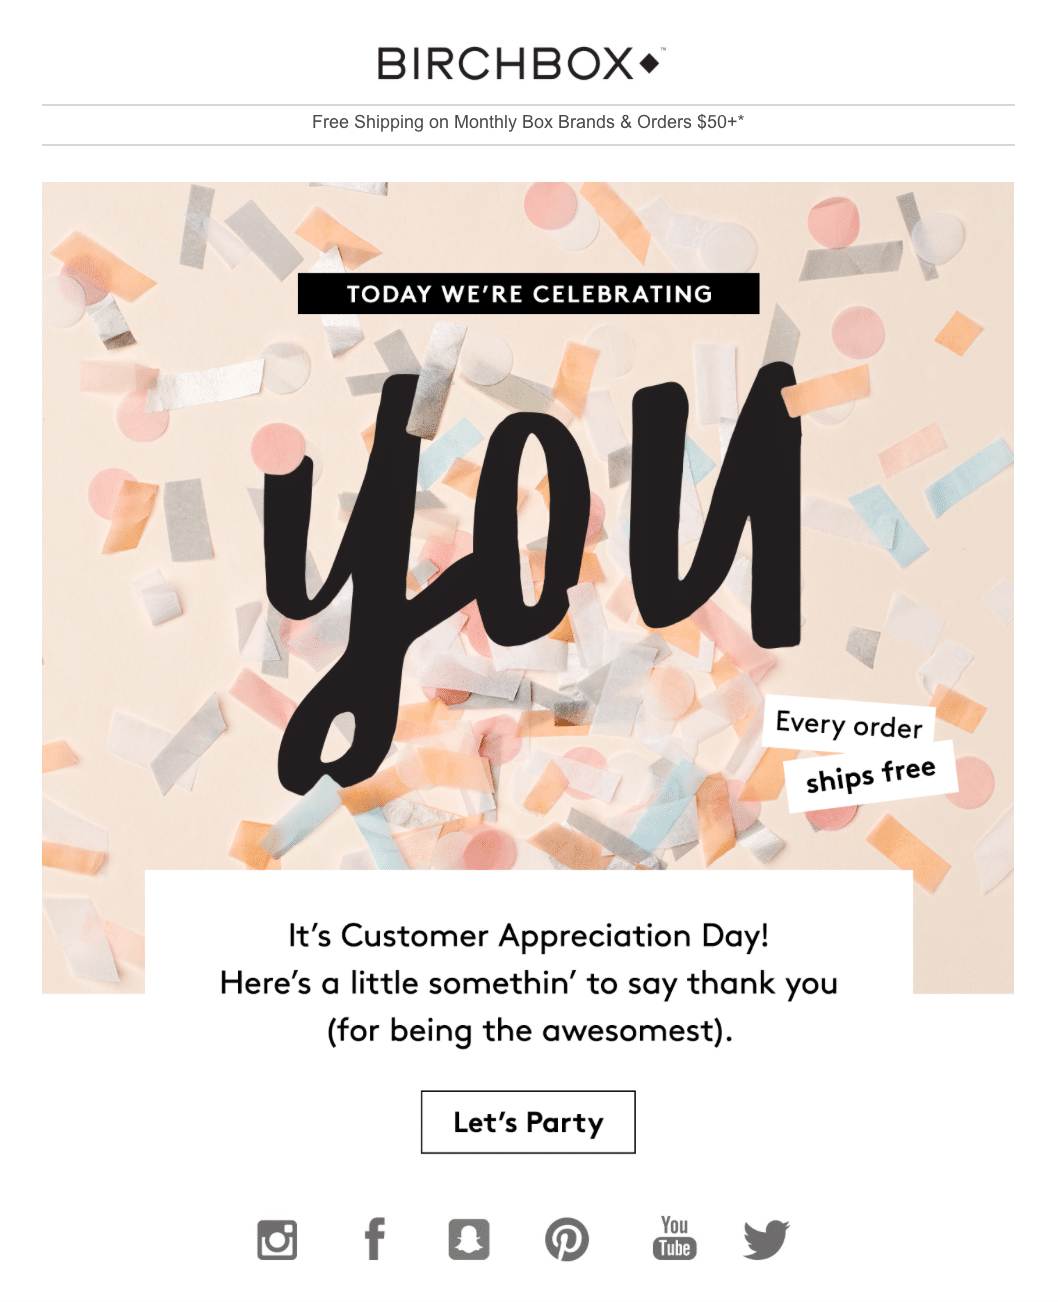 Personalized email from Birchbox